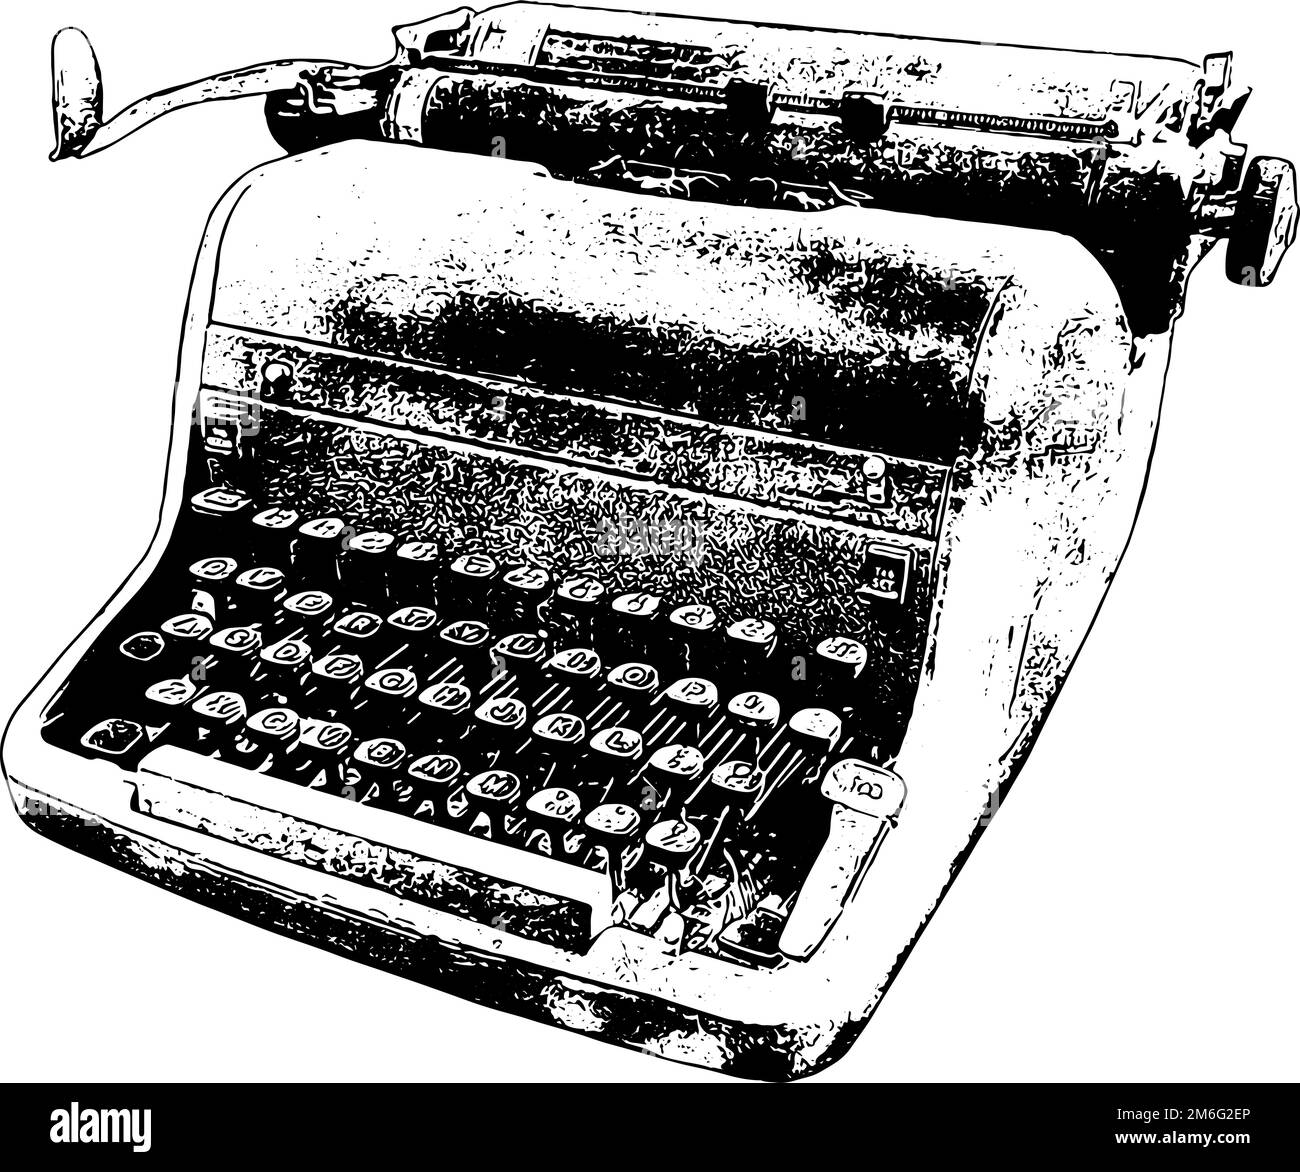 Old Fashioned manual typewriter illustration Stock Vector